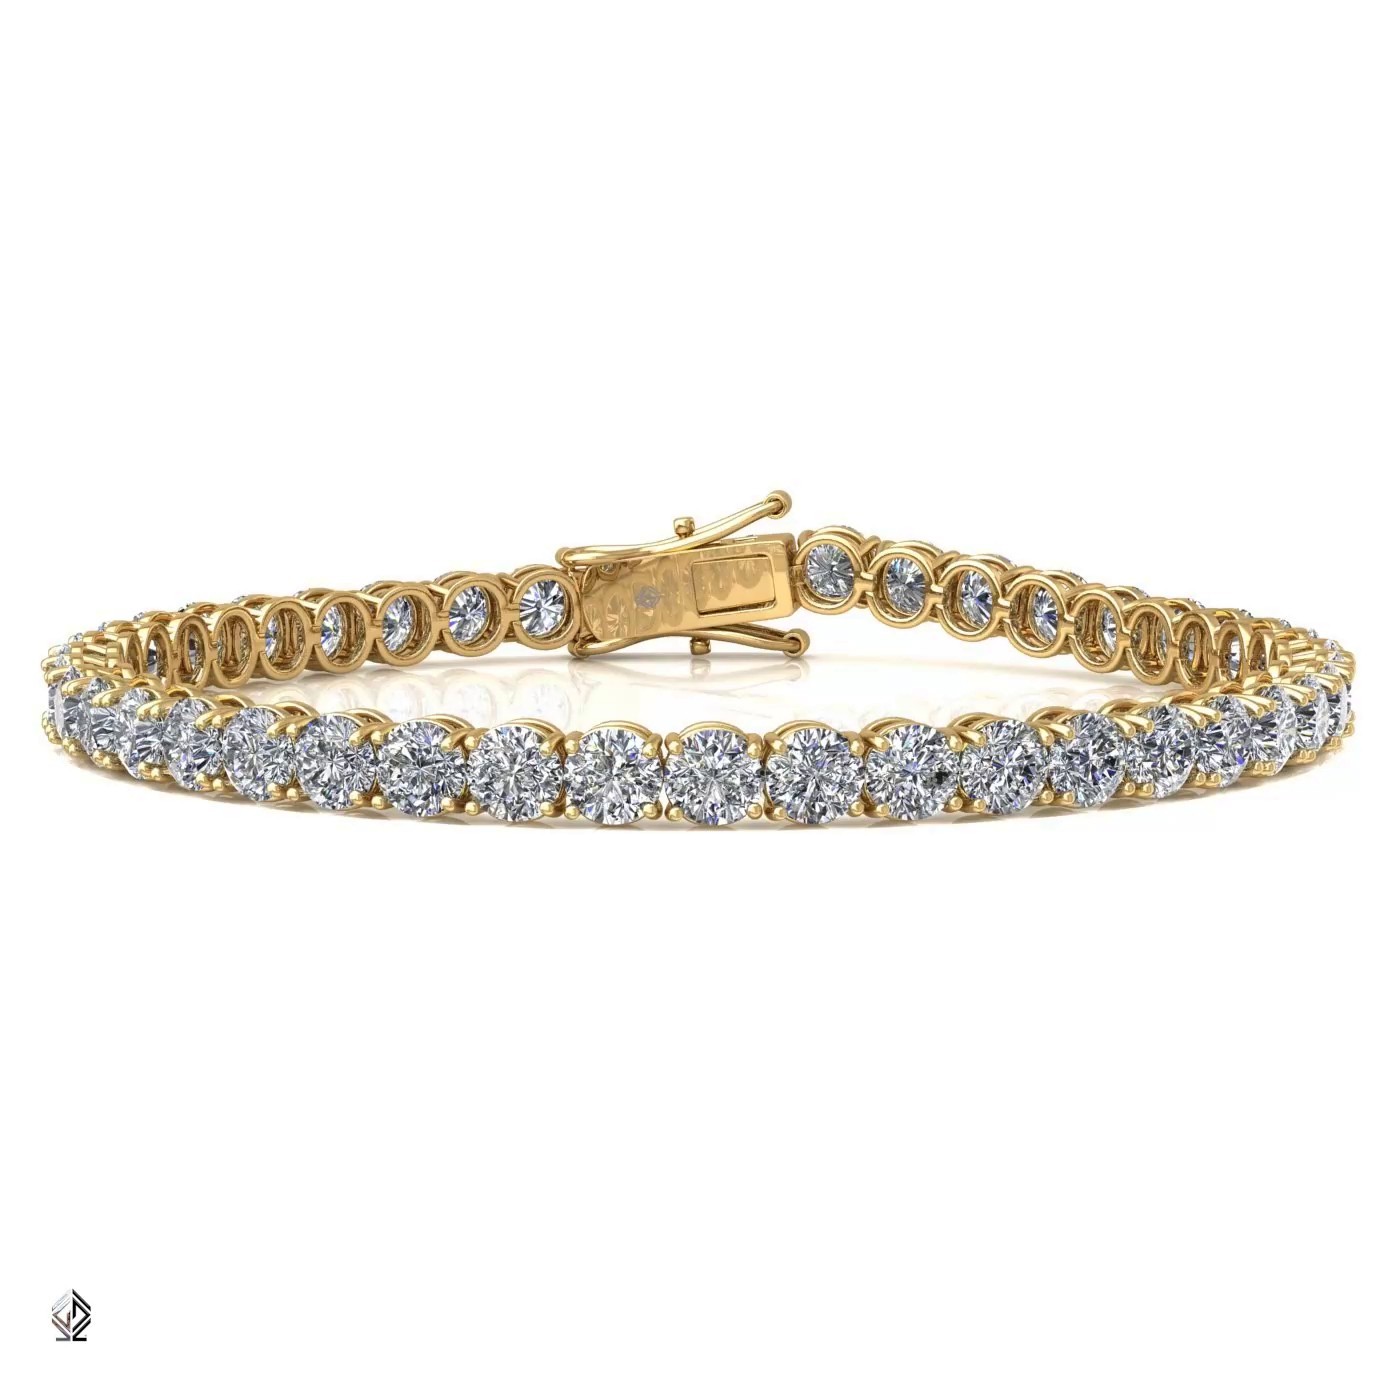 18k yellow gold 3.0 mm 4 prong round shape diamond tennis bracelet in round setting Photos & images